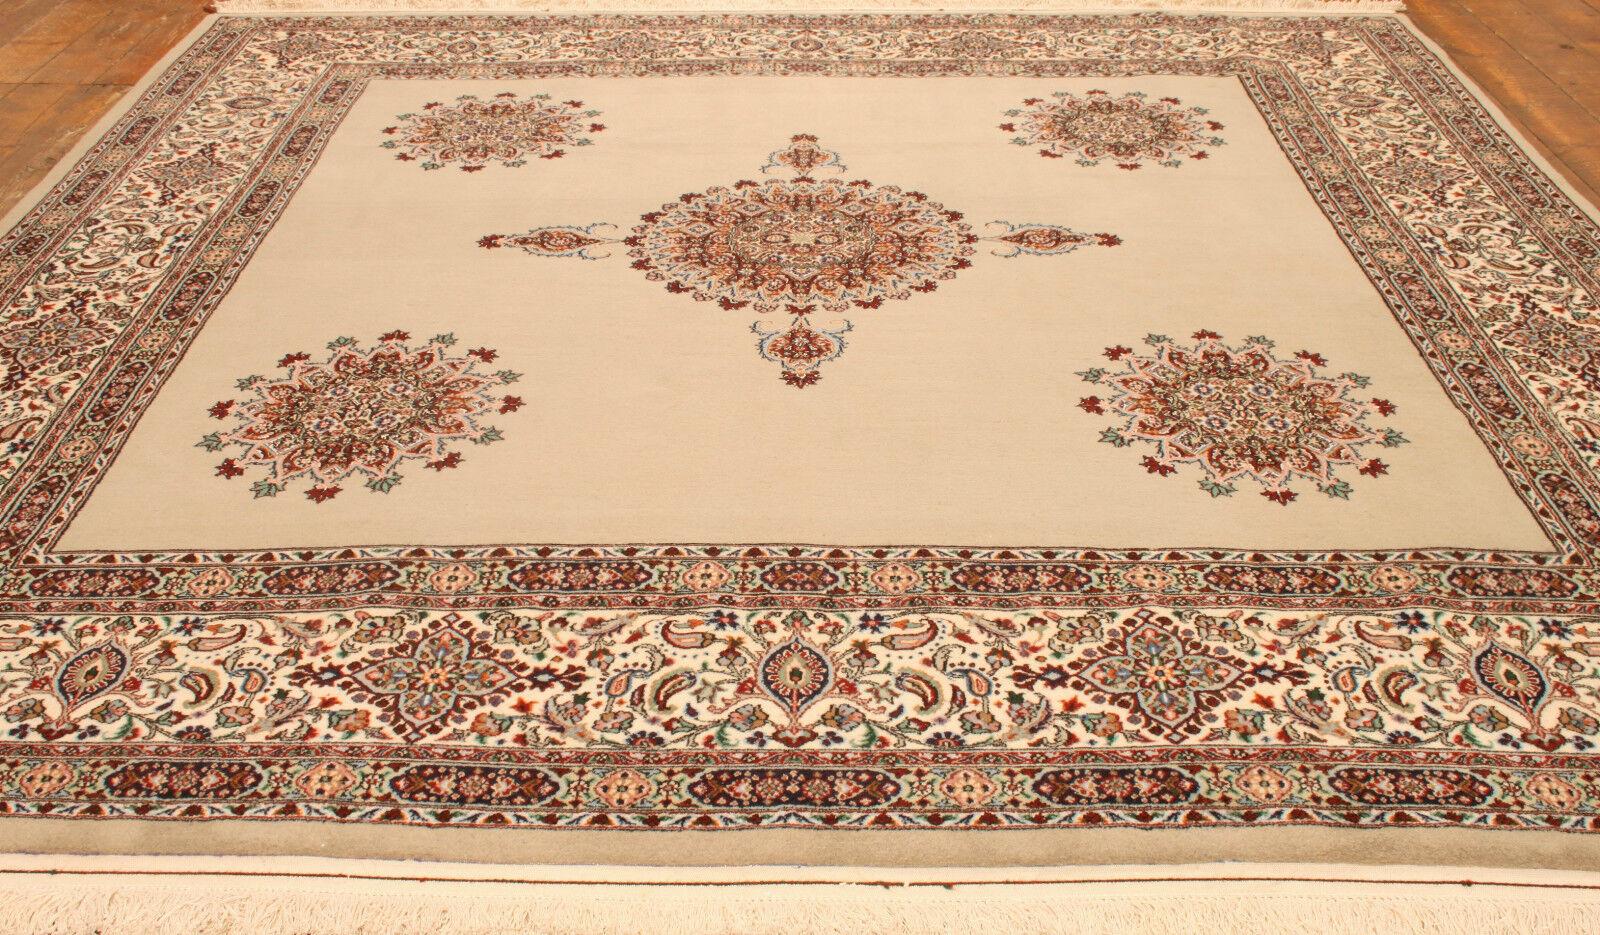 Late 20th Century Handmade Vintage Persian Style Isfahan Rug With Silk 8.1' x 8.7', 1990s - 1T48 For Sale